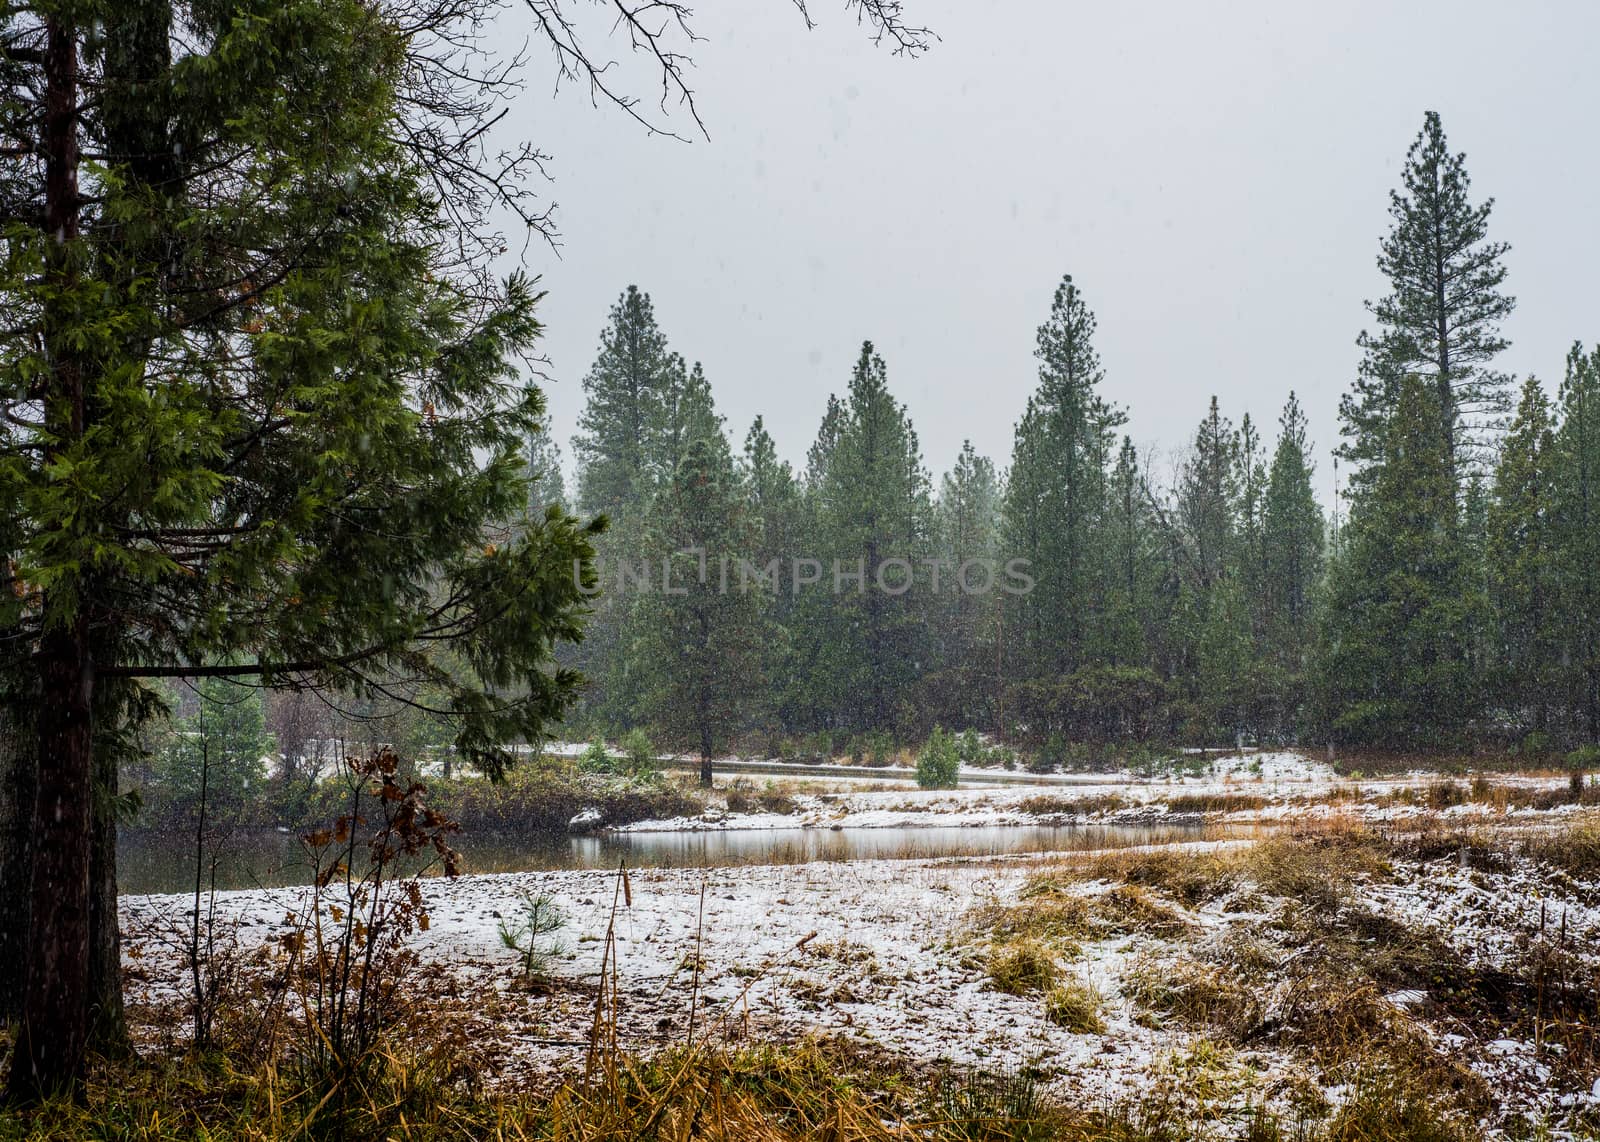 Winter snow falling in the Lassen National Park forest, California, US